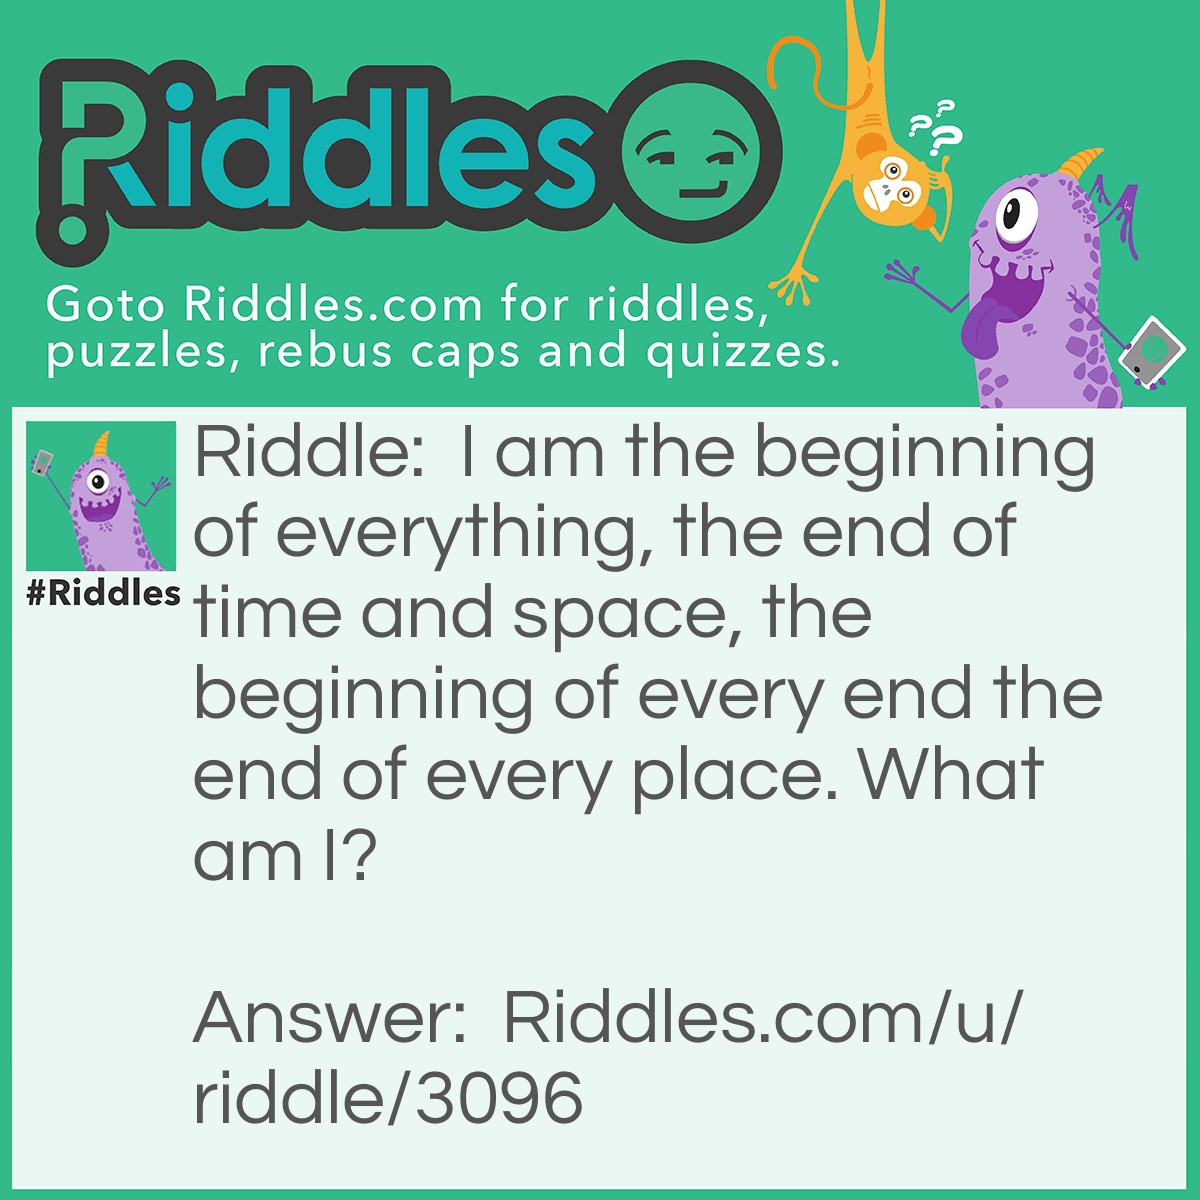 Riddle: I am the beginning of everything, the end of time and space, the beginning of every end the end of every place. What am I? Answer: The letter E.